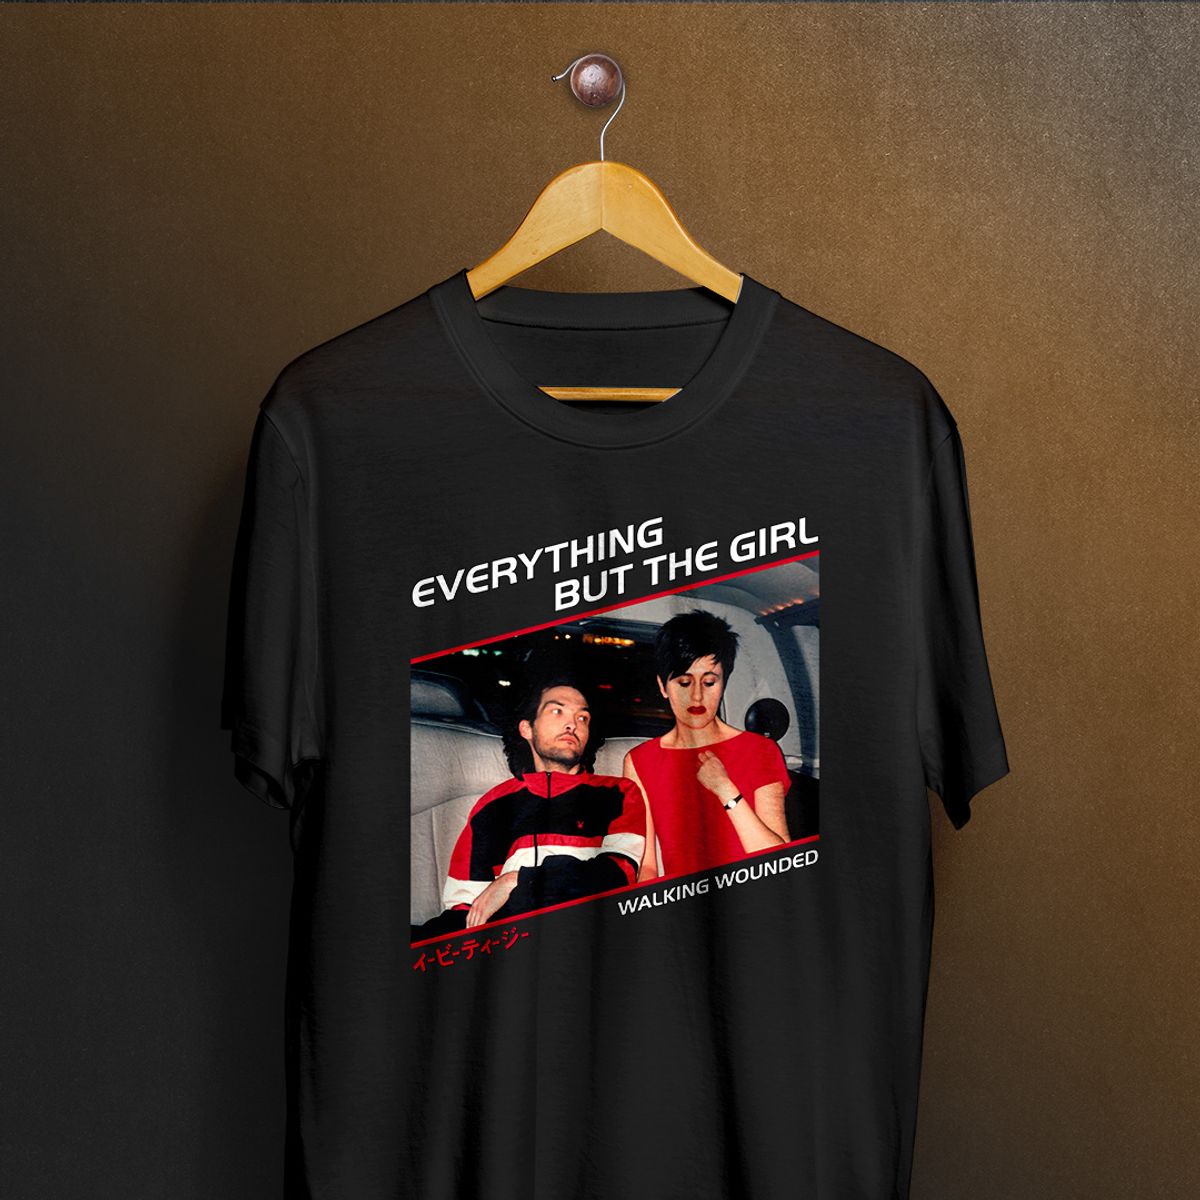 Nome do produto: Camiseta Everything But The Girl - Walking Wounded